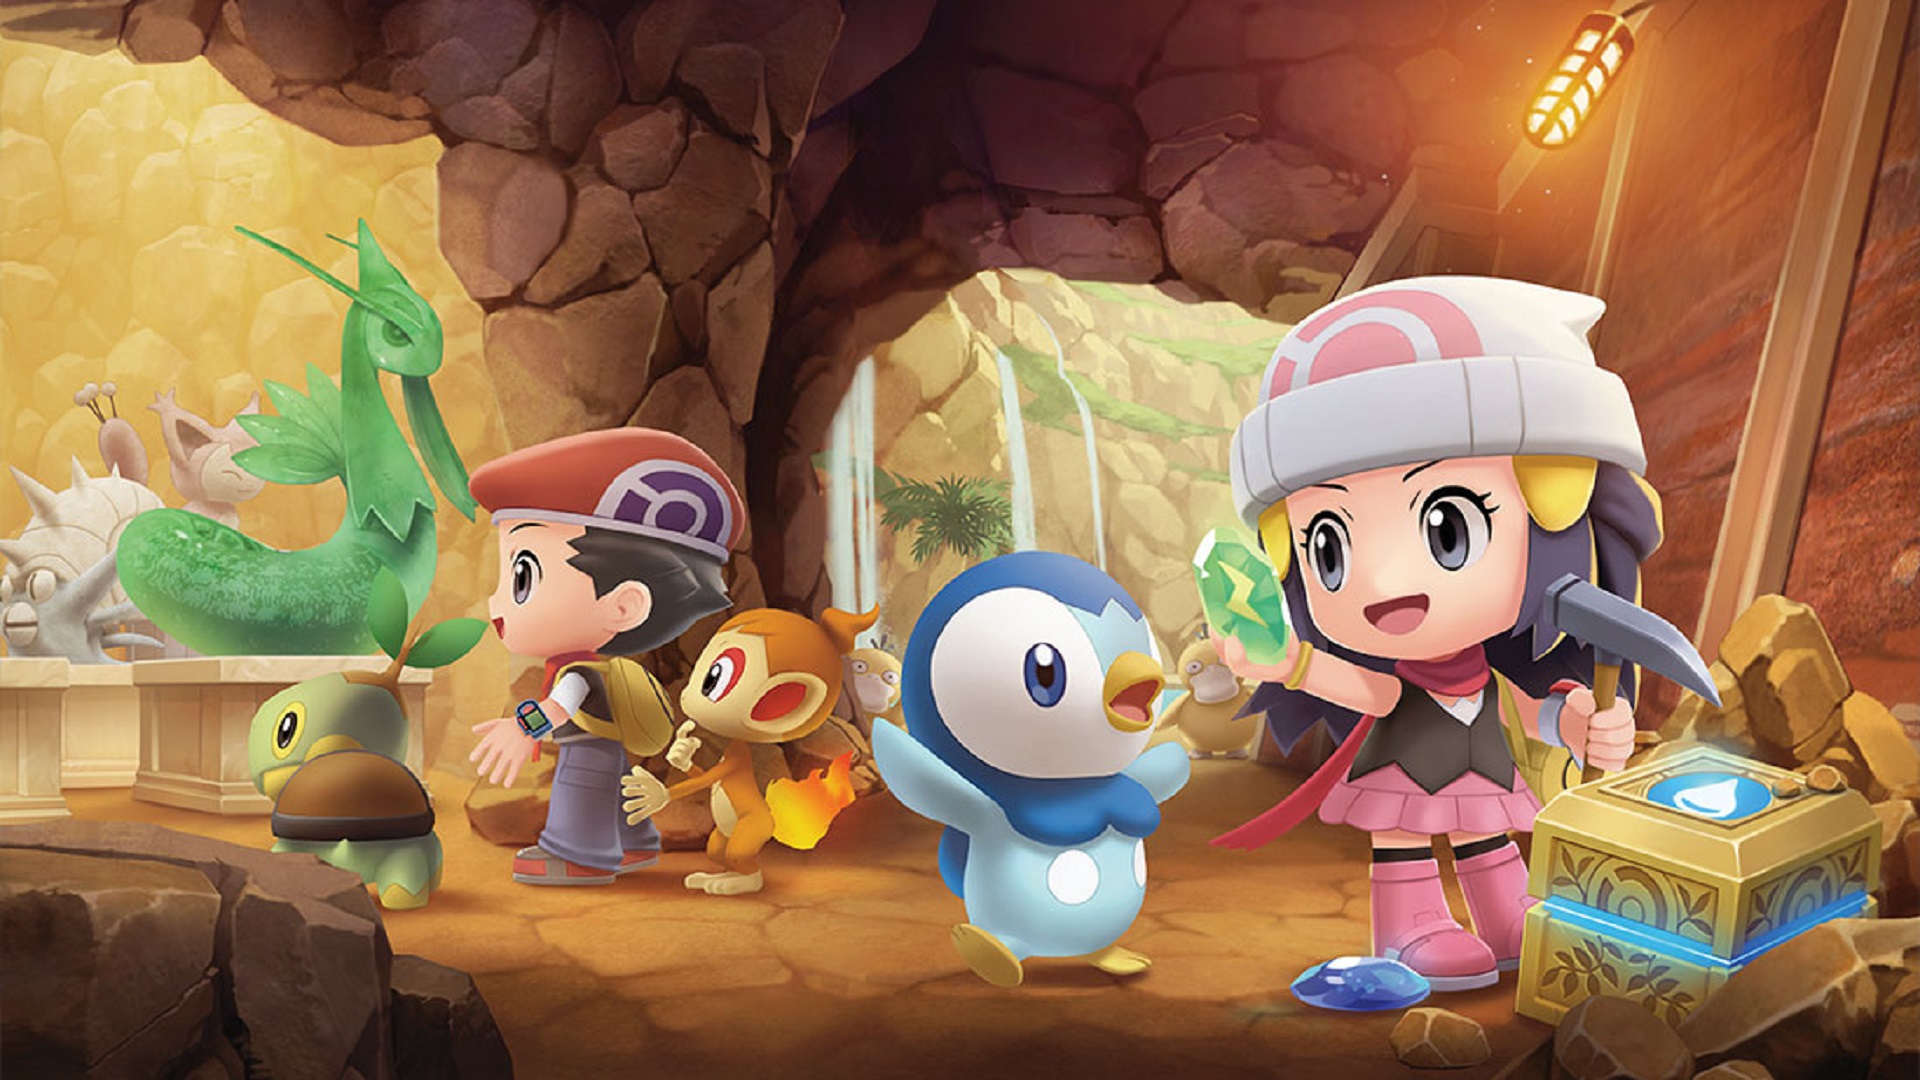 Pokémon Switch games - Pokémon Brilliant Diamond & Shining Pearl. Promotional image for the game shows trainers and Pokémon in the game's underground. 